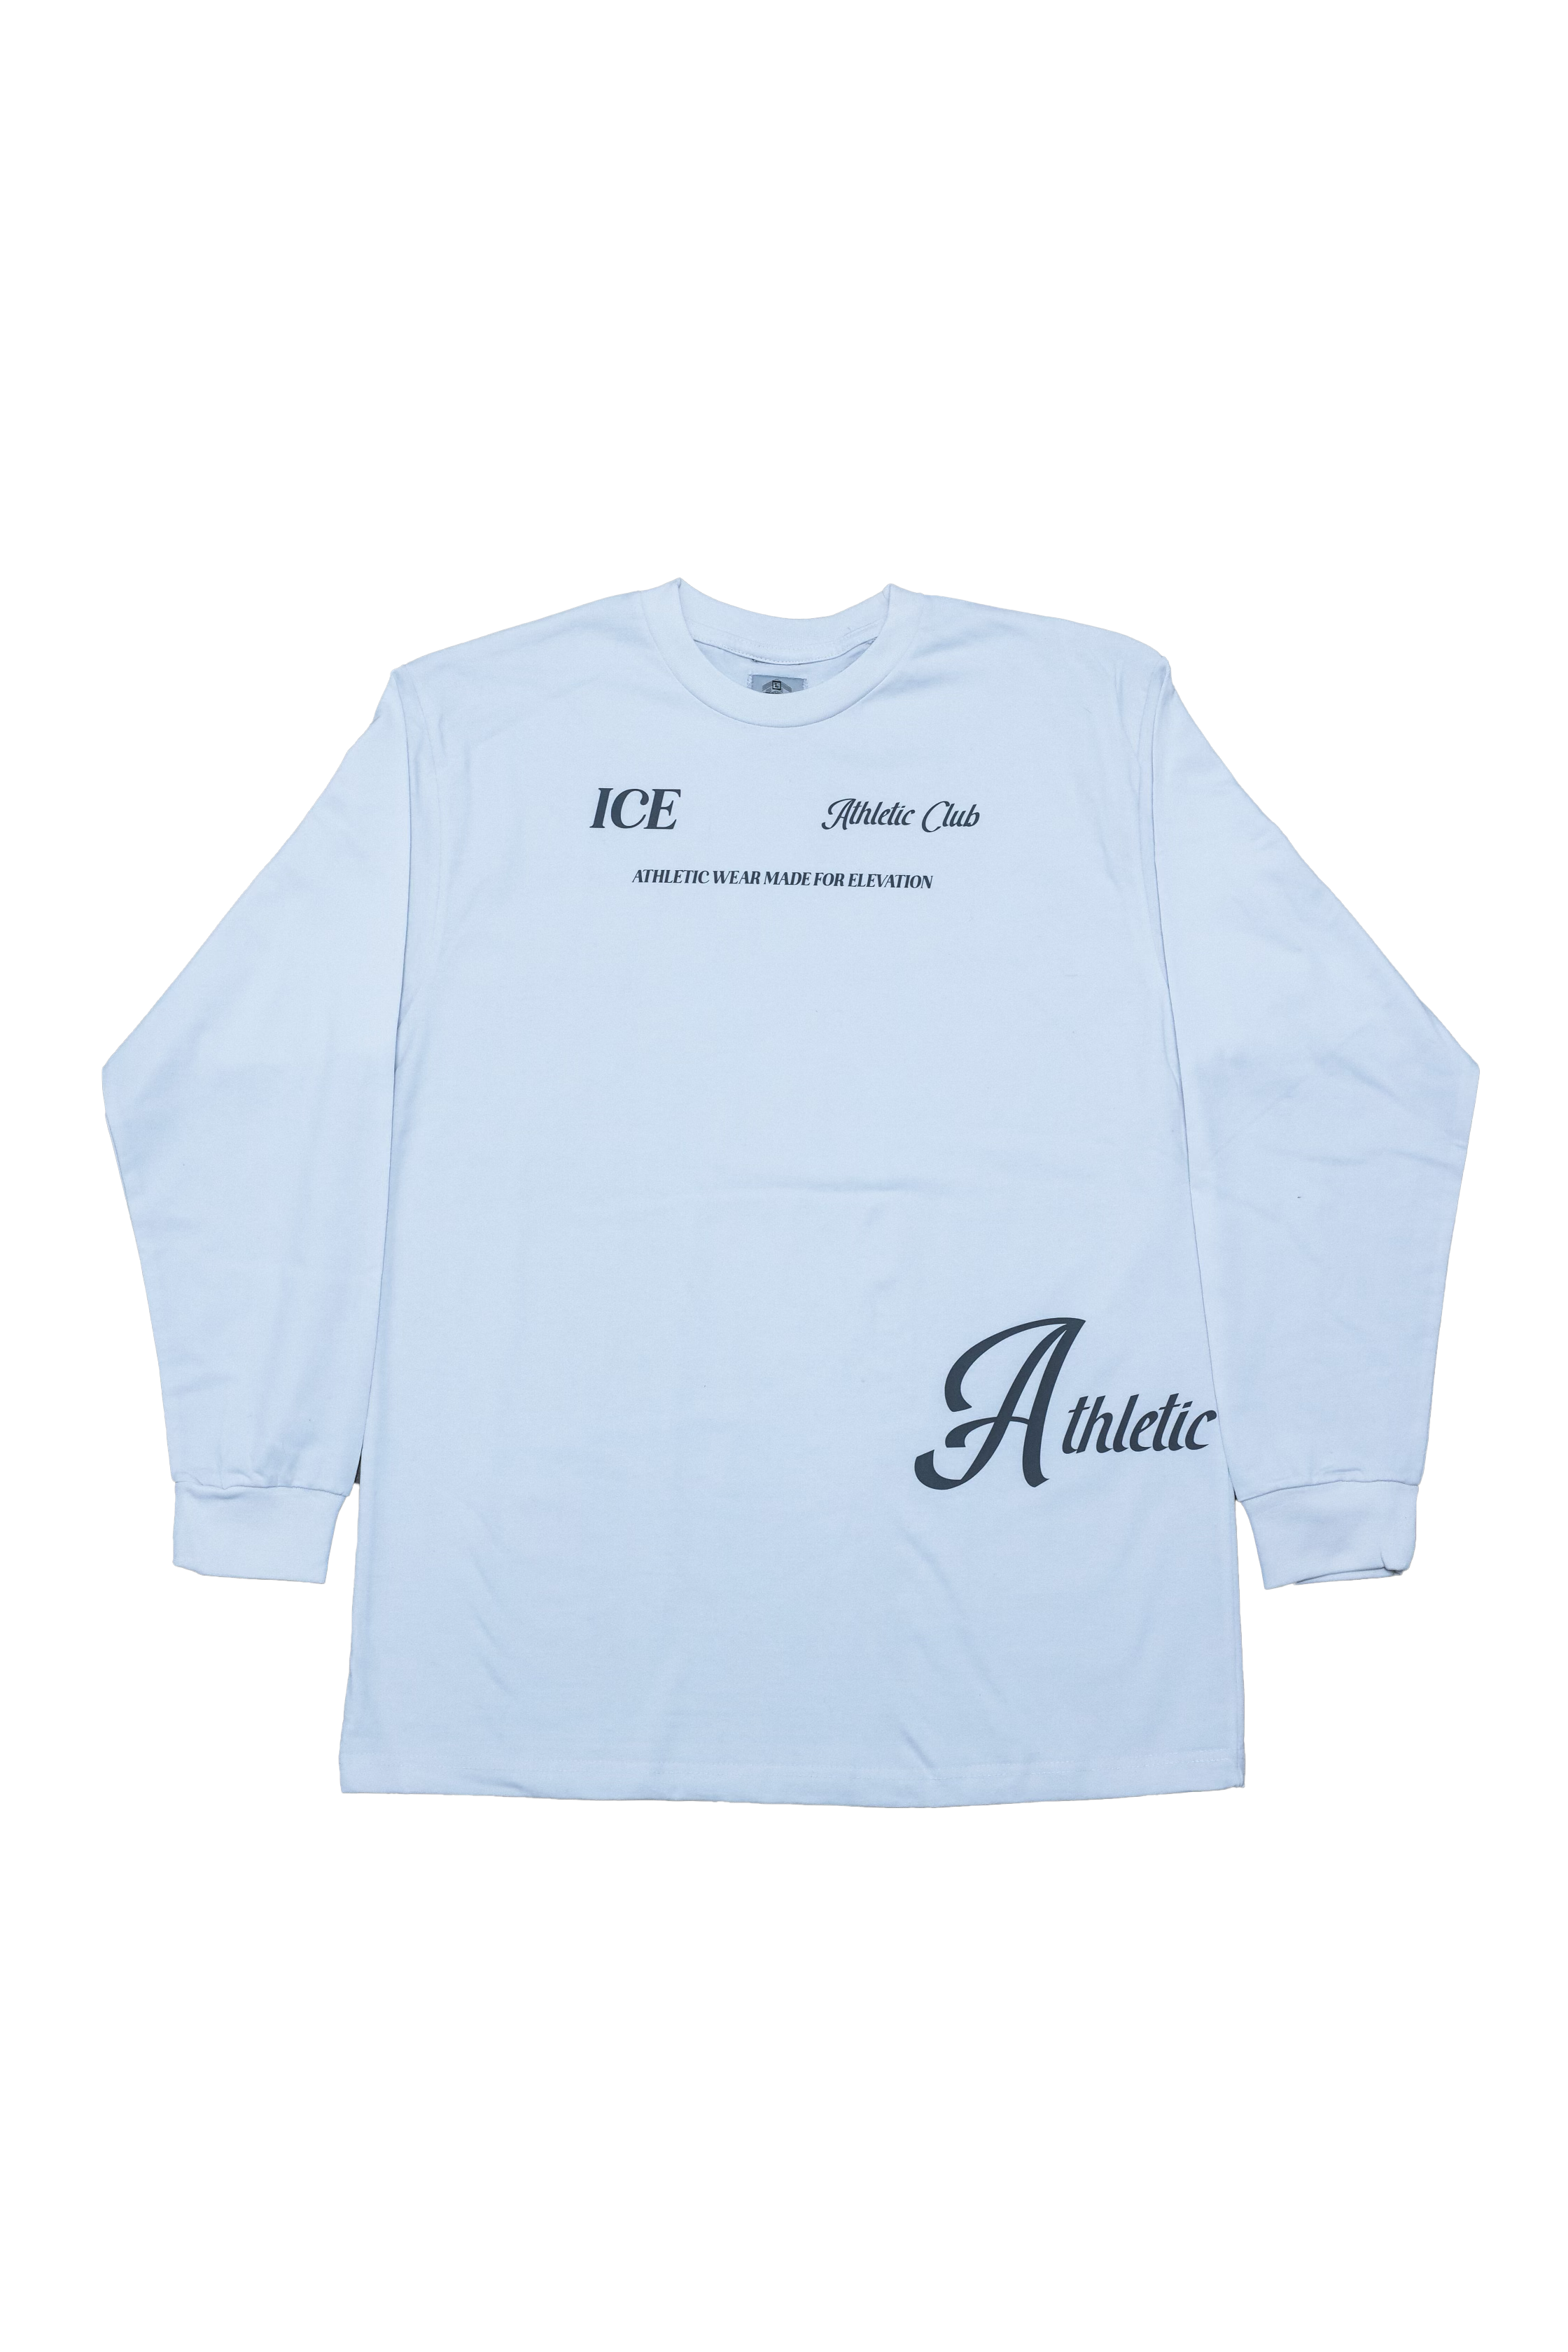 THE ATHLETIC CLUB LONG SLEEVE  - WHITE